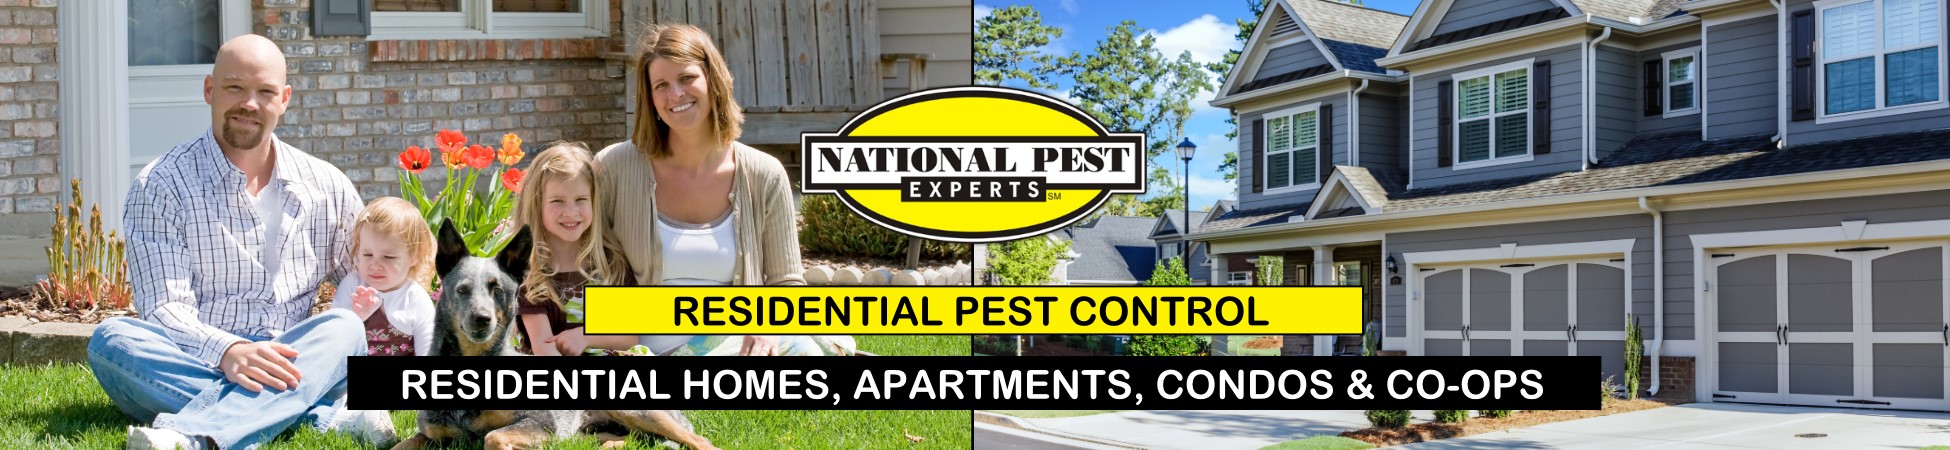 National Pest Experts - Residential exterminating and pest control in Islandia, NY